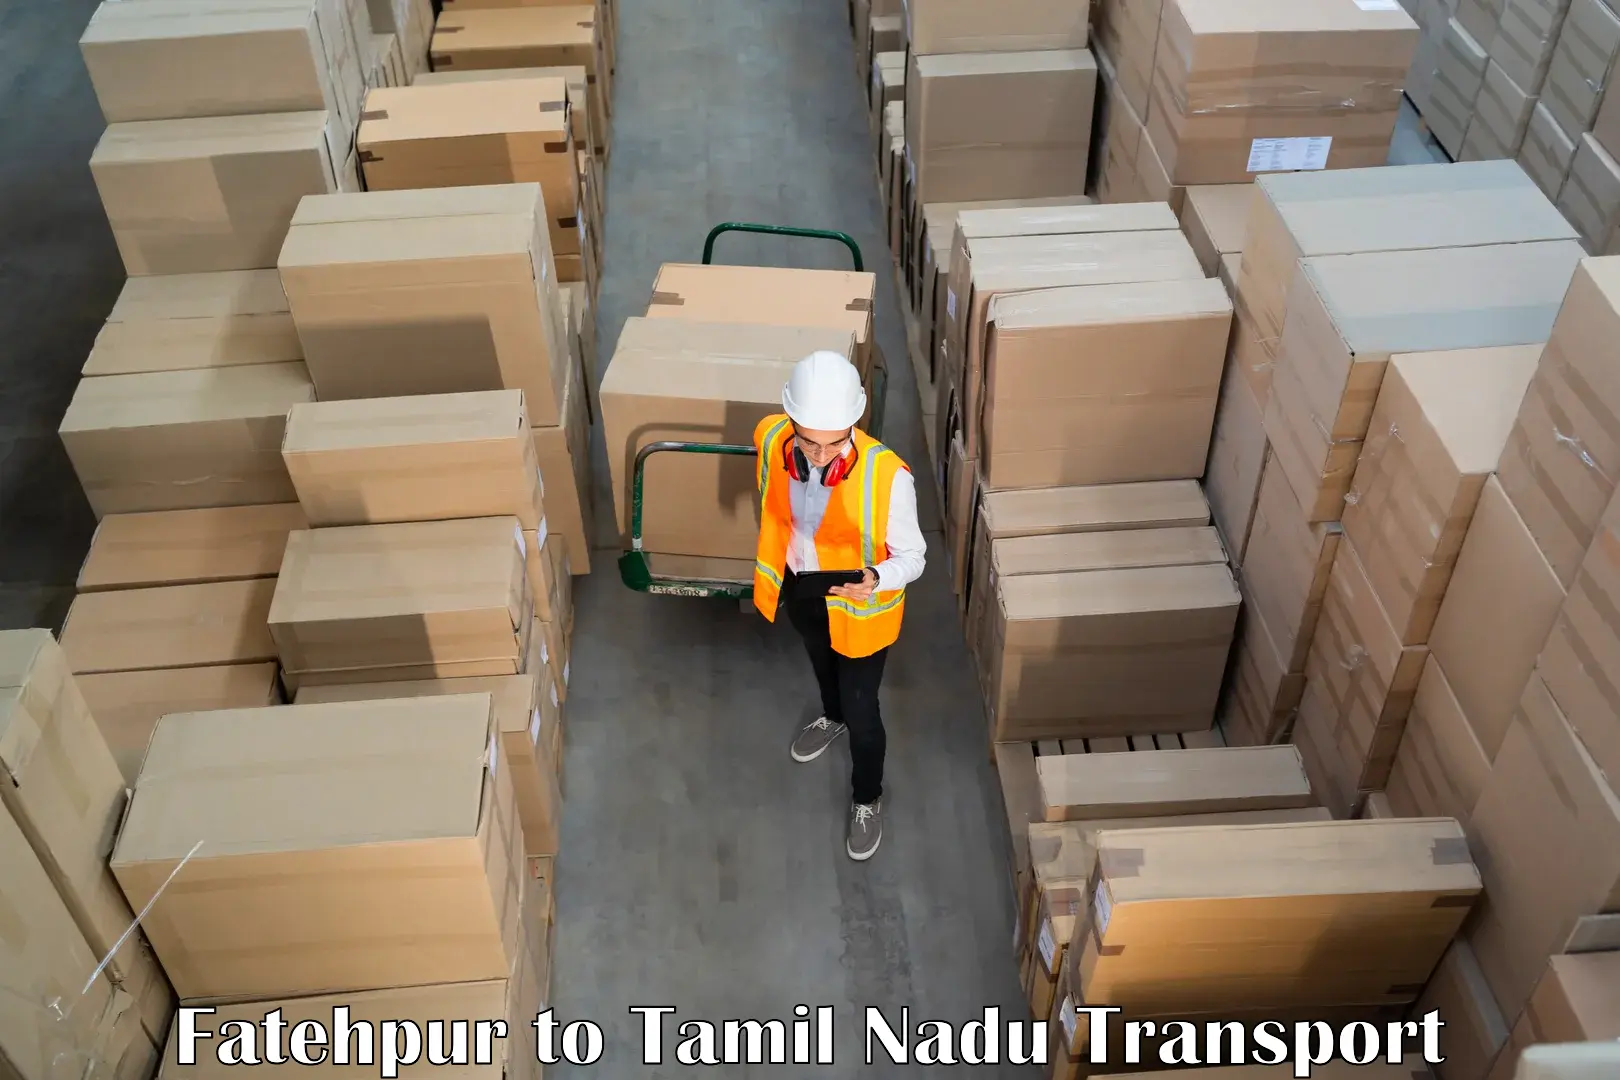 Air freight transport services Fatehpur to Shanmugha Arts Science Technology and Research Academy Thanjavur